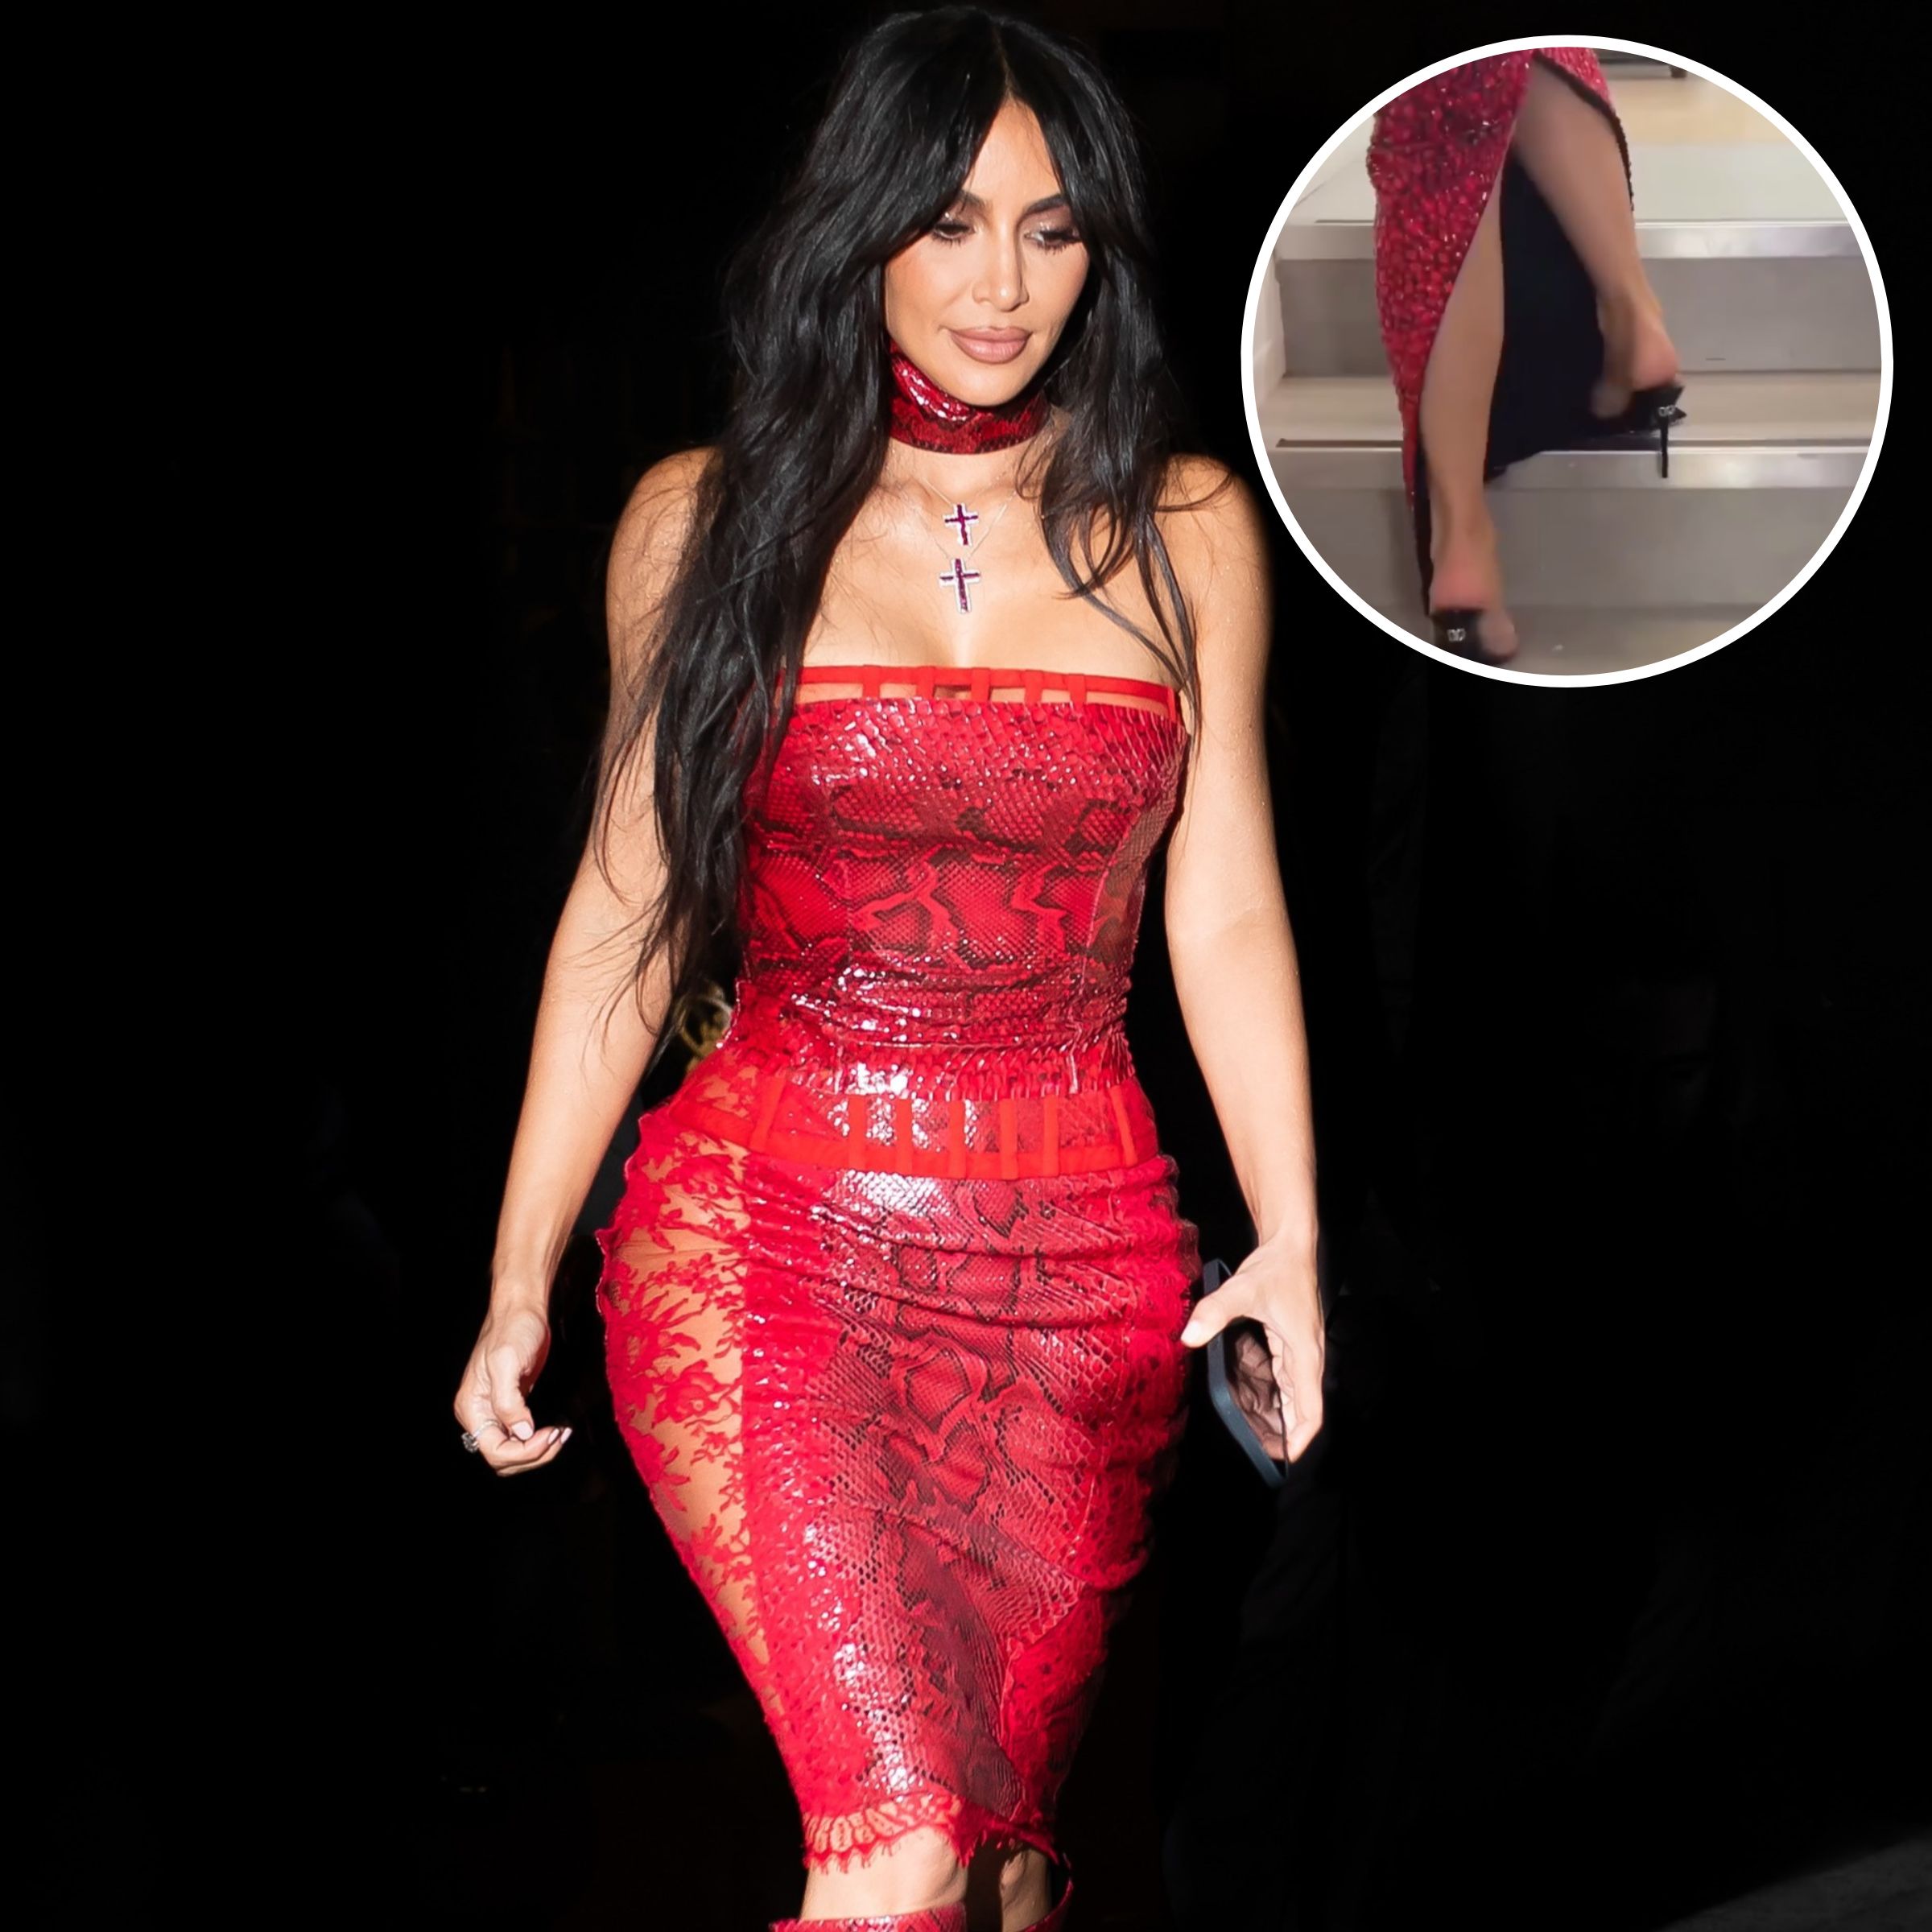 Kim Kardashian Stepped Out in a Skin-Tight Leather Dress